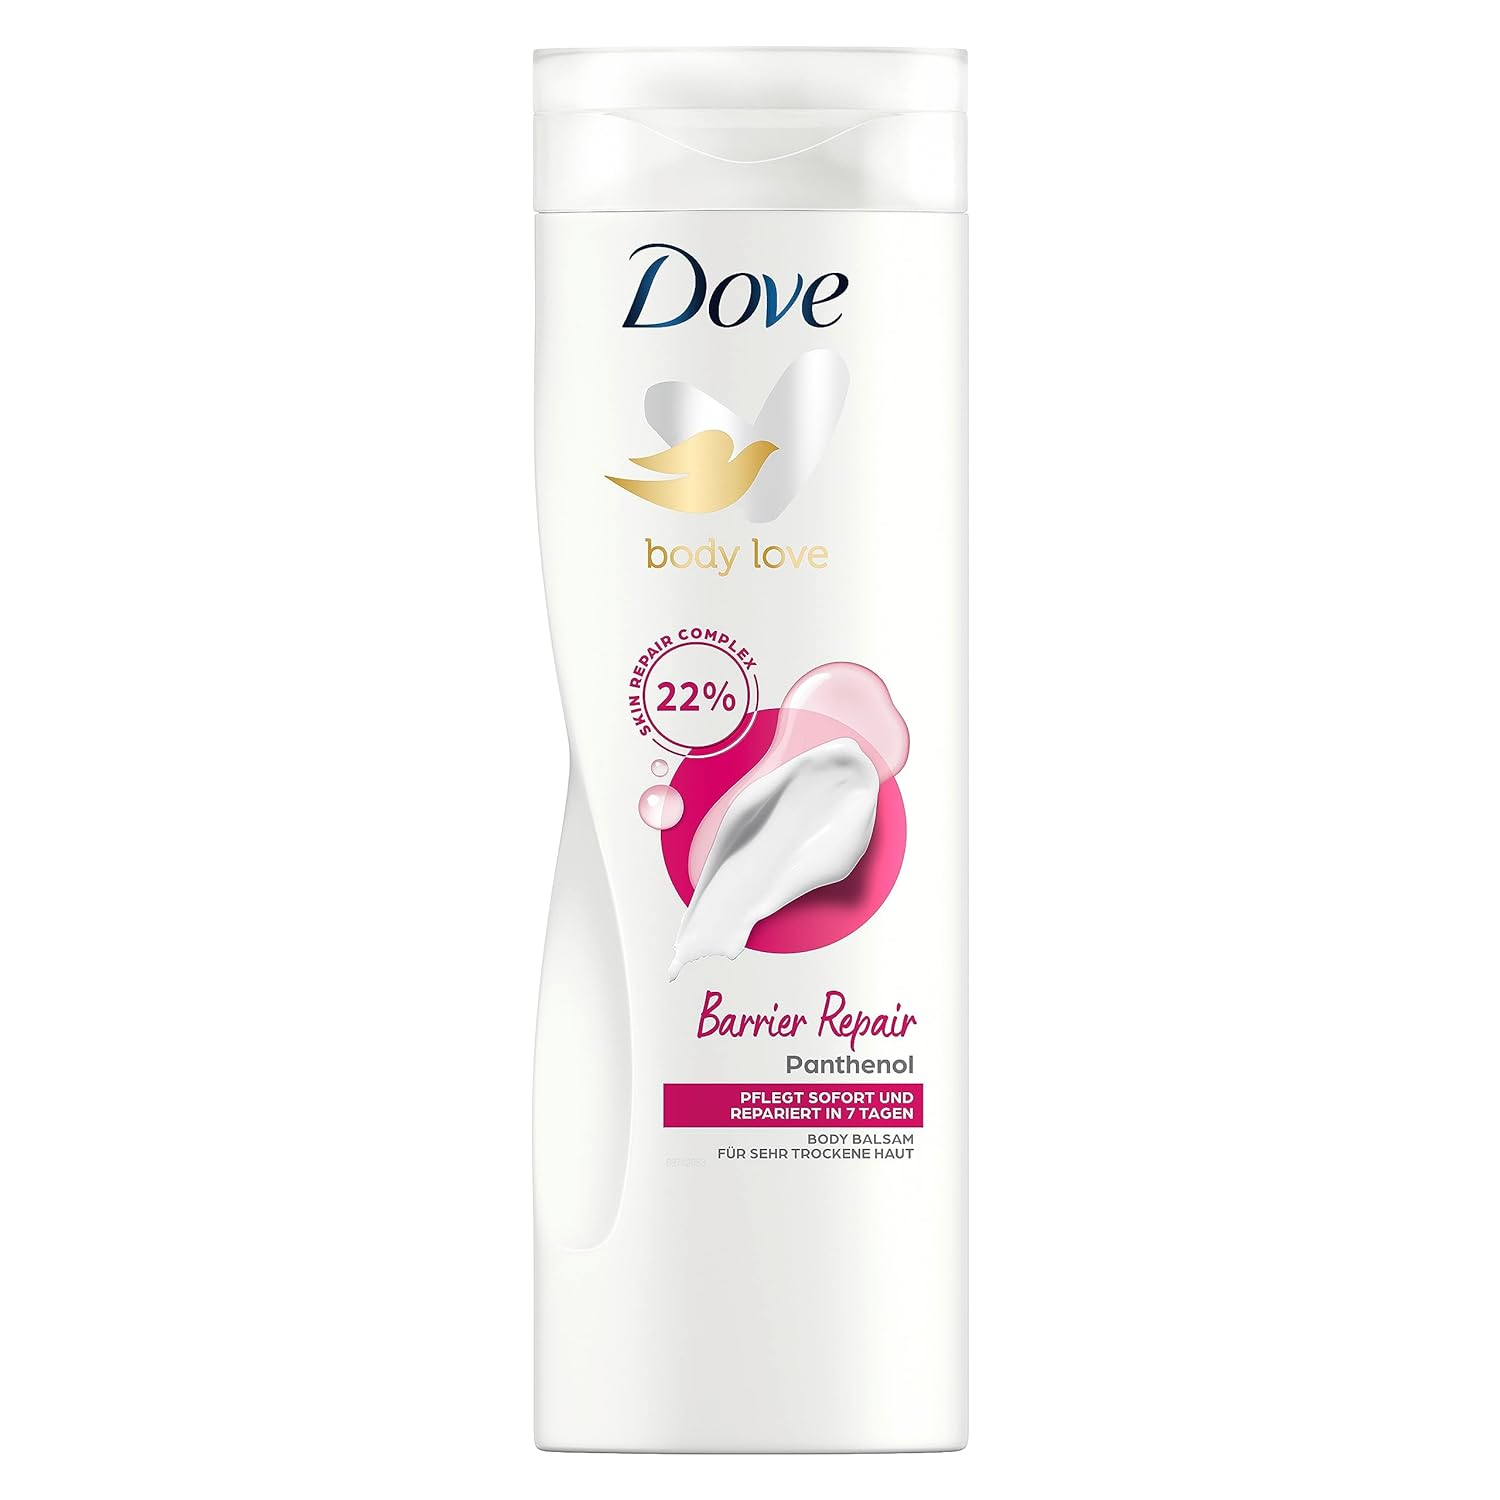 Dove Body Love Barrier Repair Body Balm Body Care for Very Dry Skin with 22% Skin Repair Complex and Panthenol 400 ml